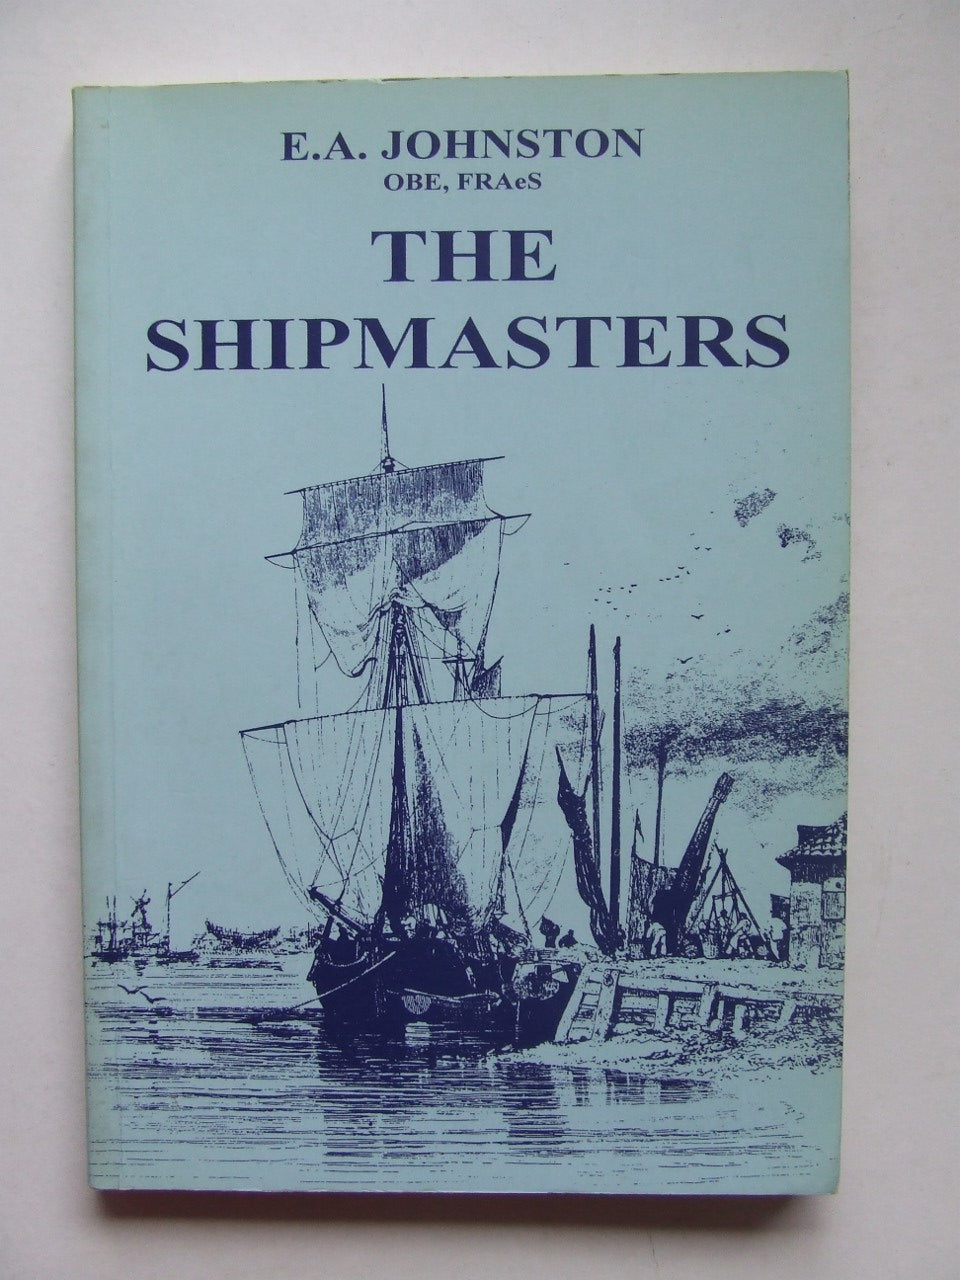 The Shipmasters